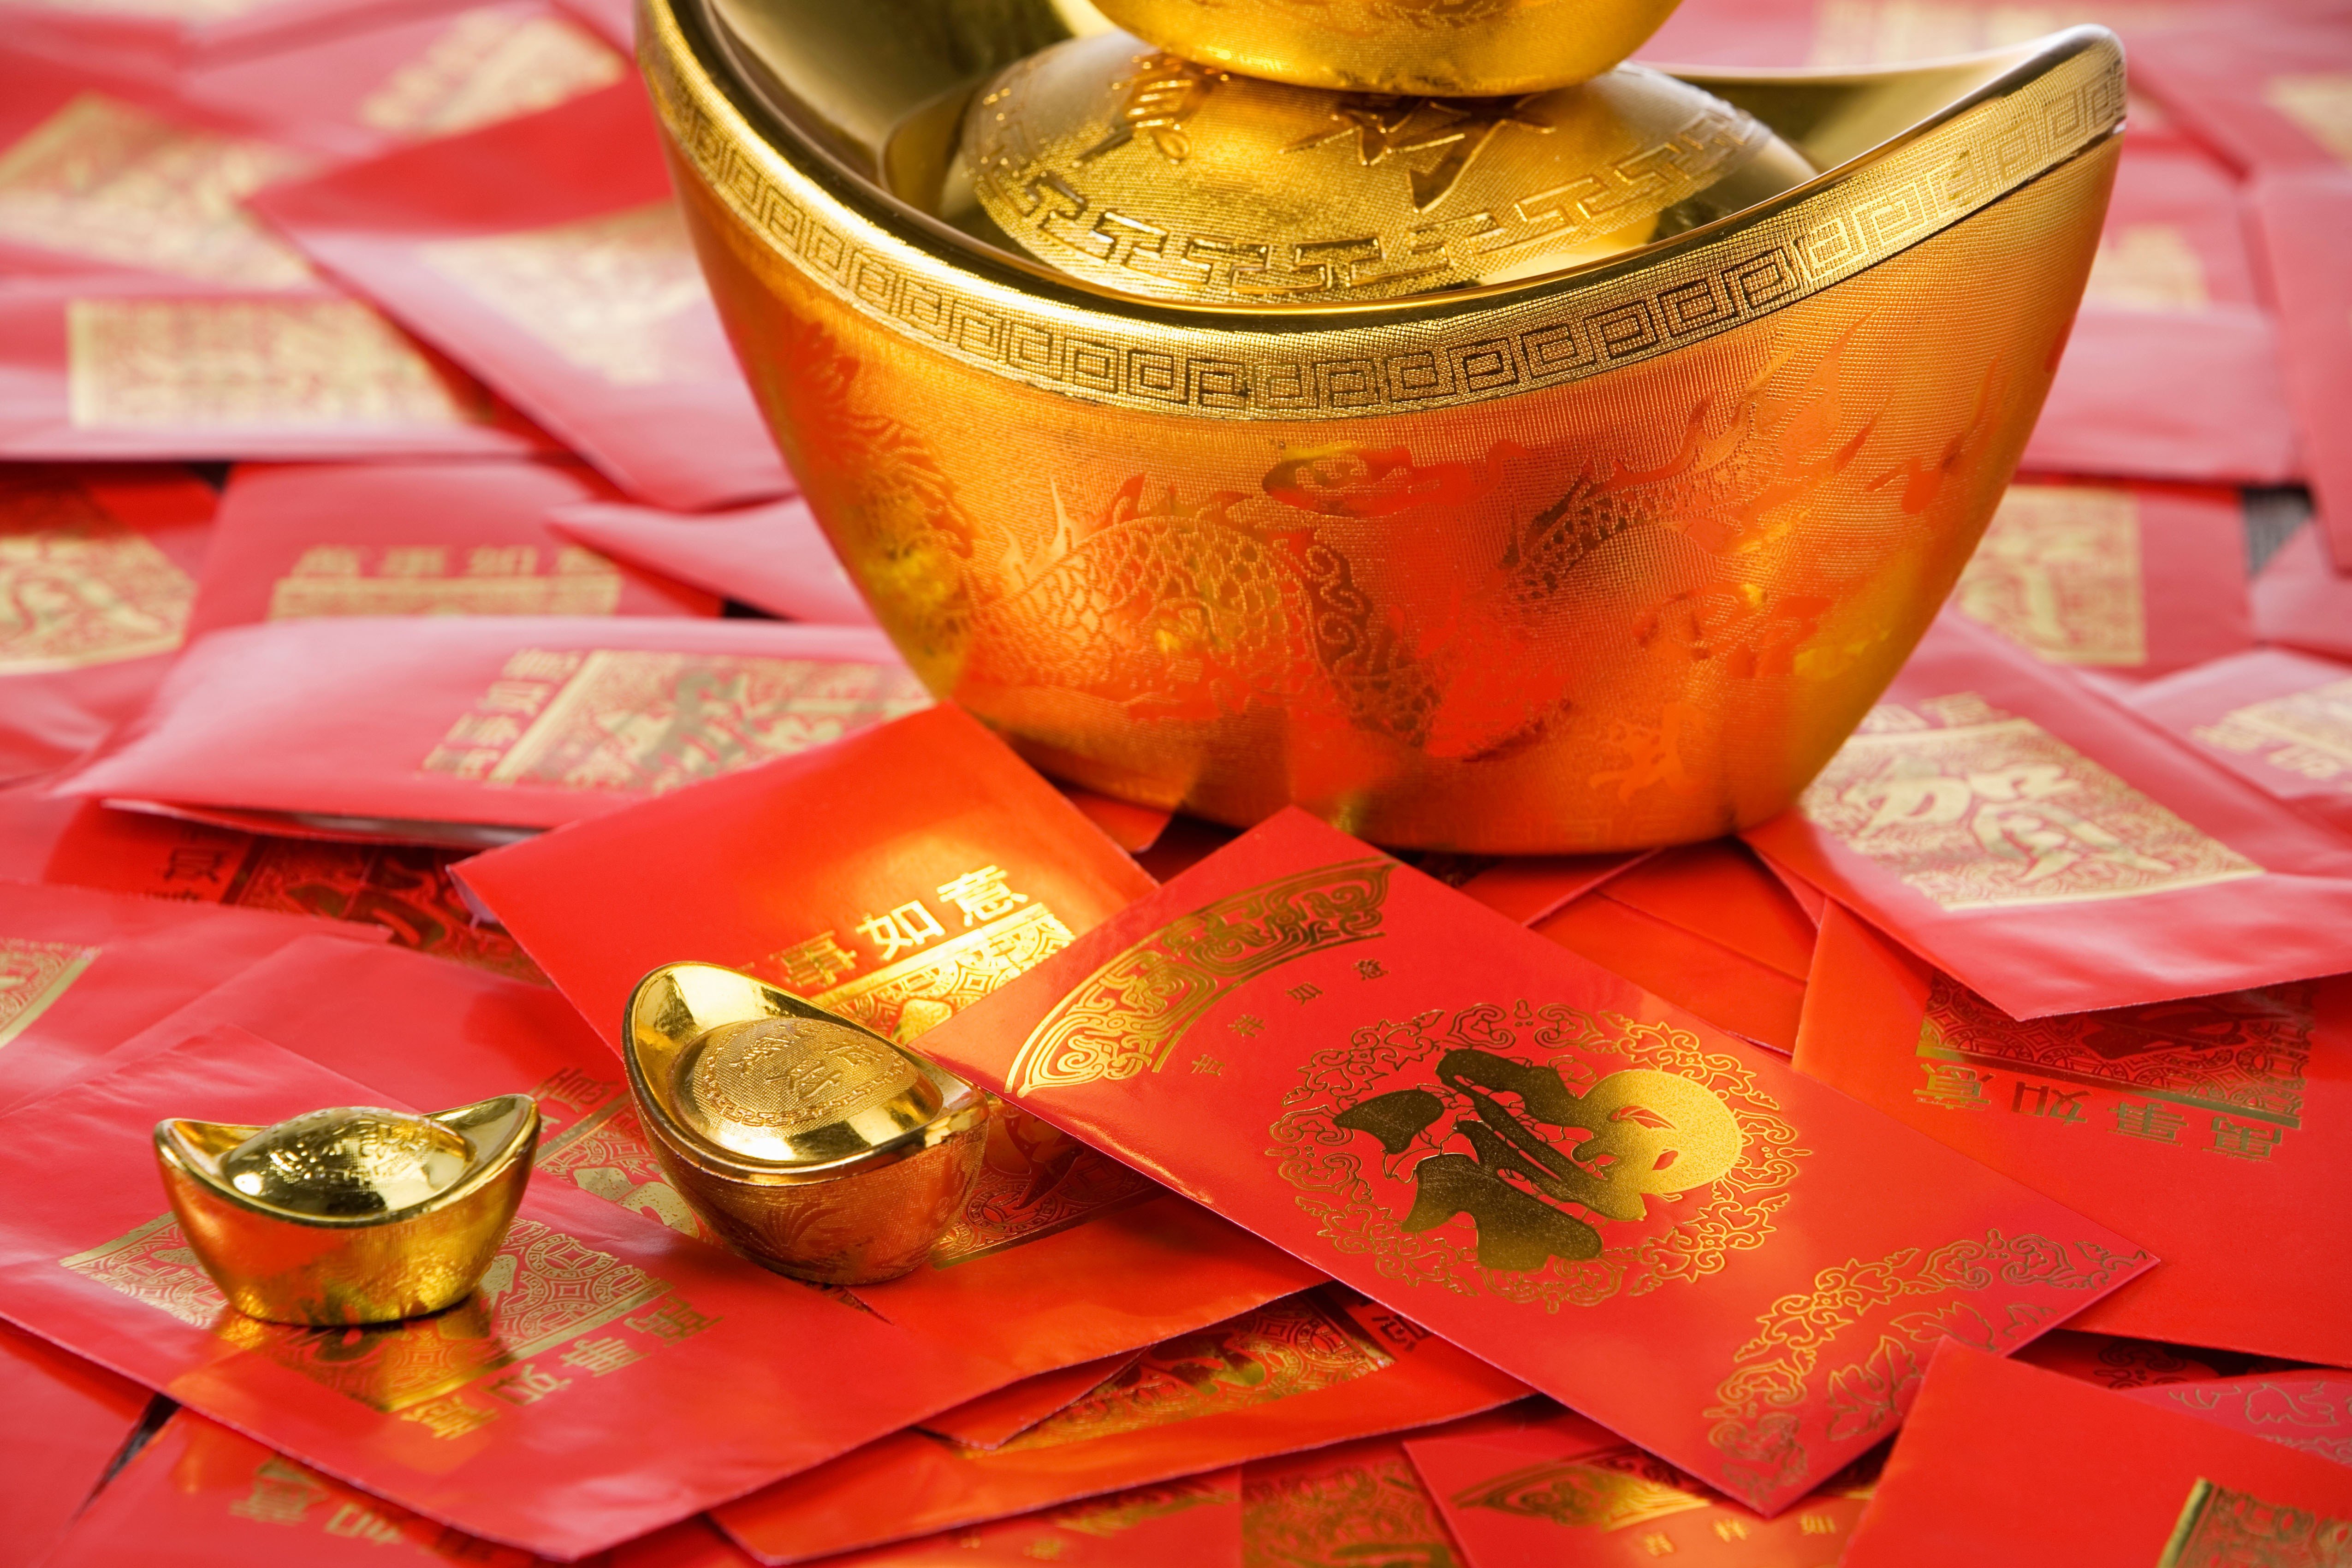 Children receive lai see packets containing money as gifts during Lunar New Year. Photo: Alamy